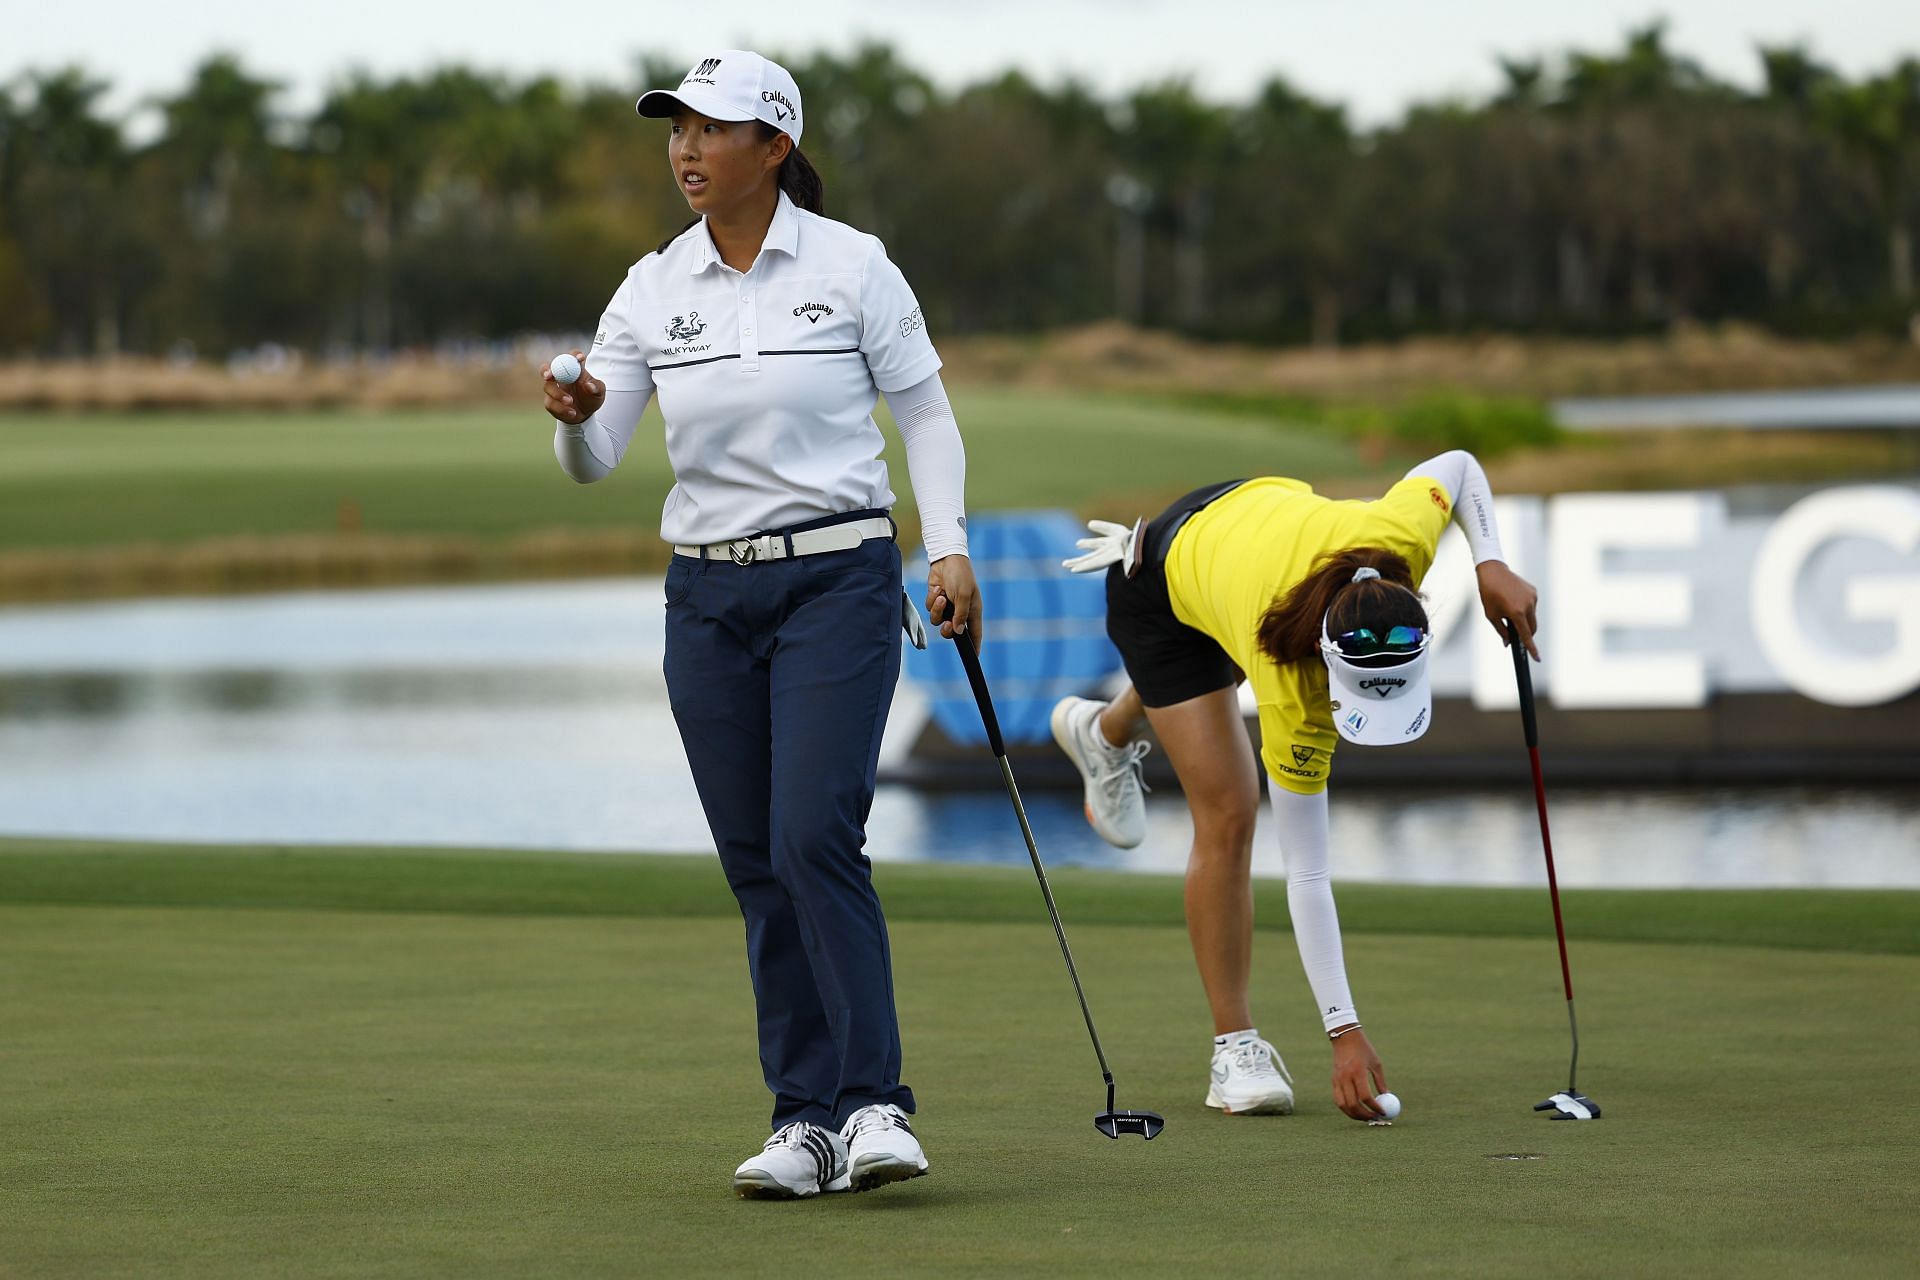 Ruoning Yin and Atthaya Thitikul at the 2023 CME Group Tour Championship (Source: Getty)